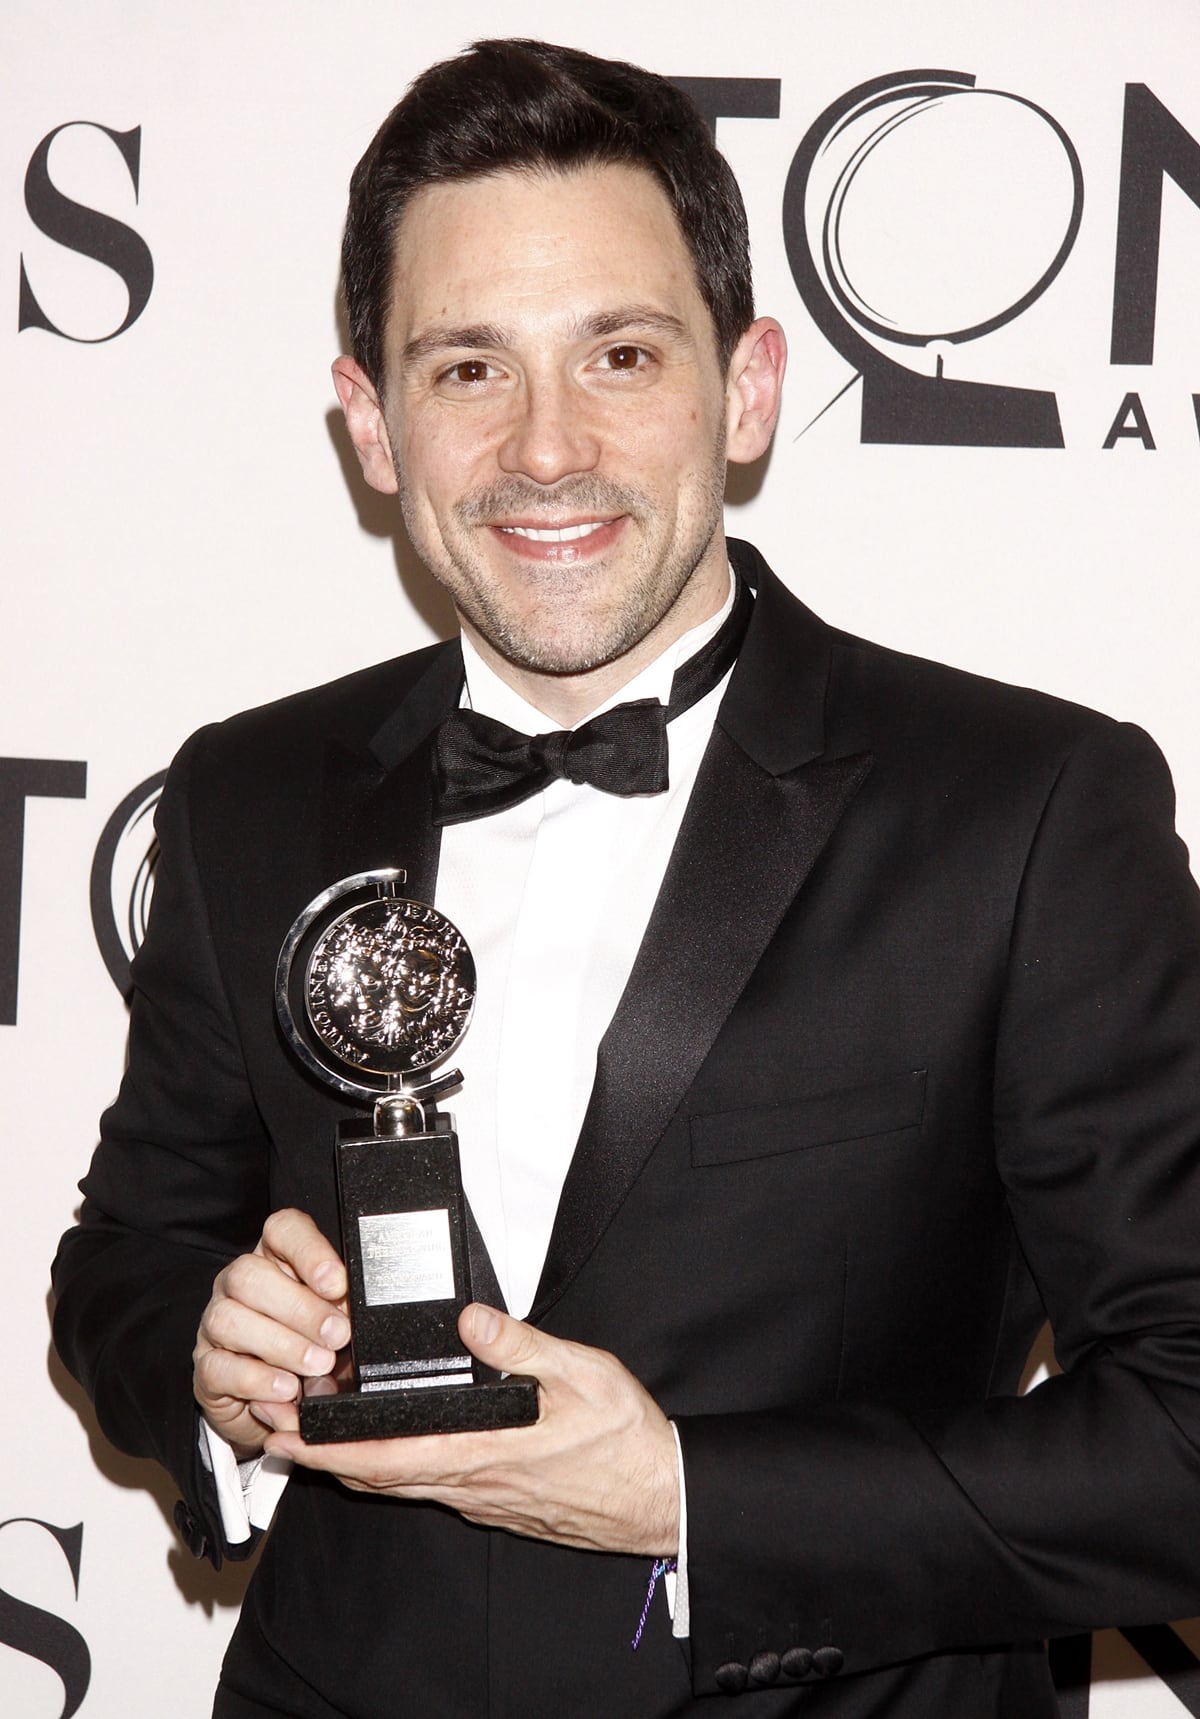 Steven Michael Kazee was awarded the 2012 Tony Award for Best Performance by a Leading Actor in a Musical for his performance as Guy in the musical Once